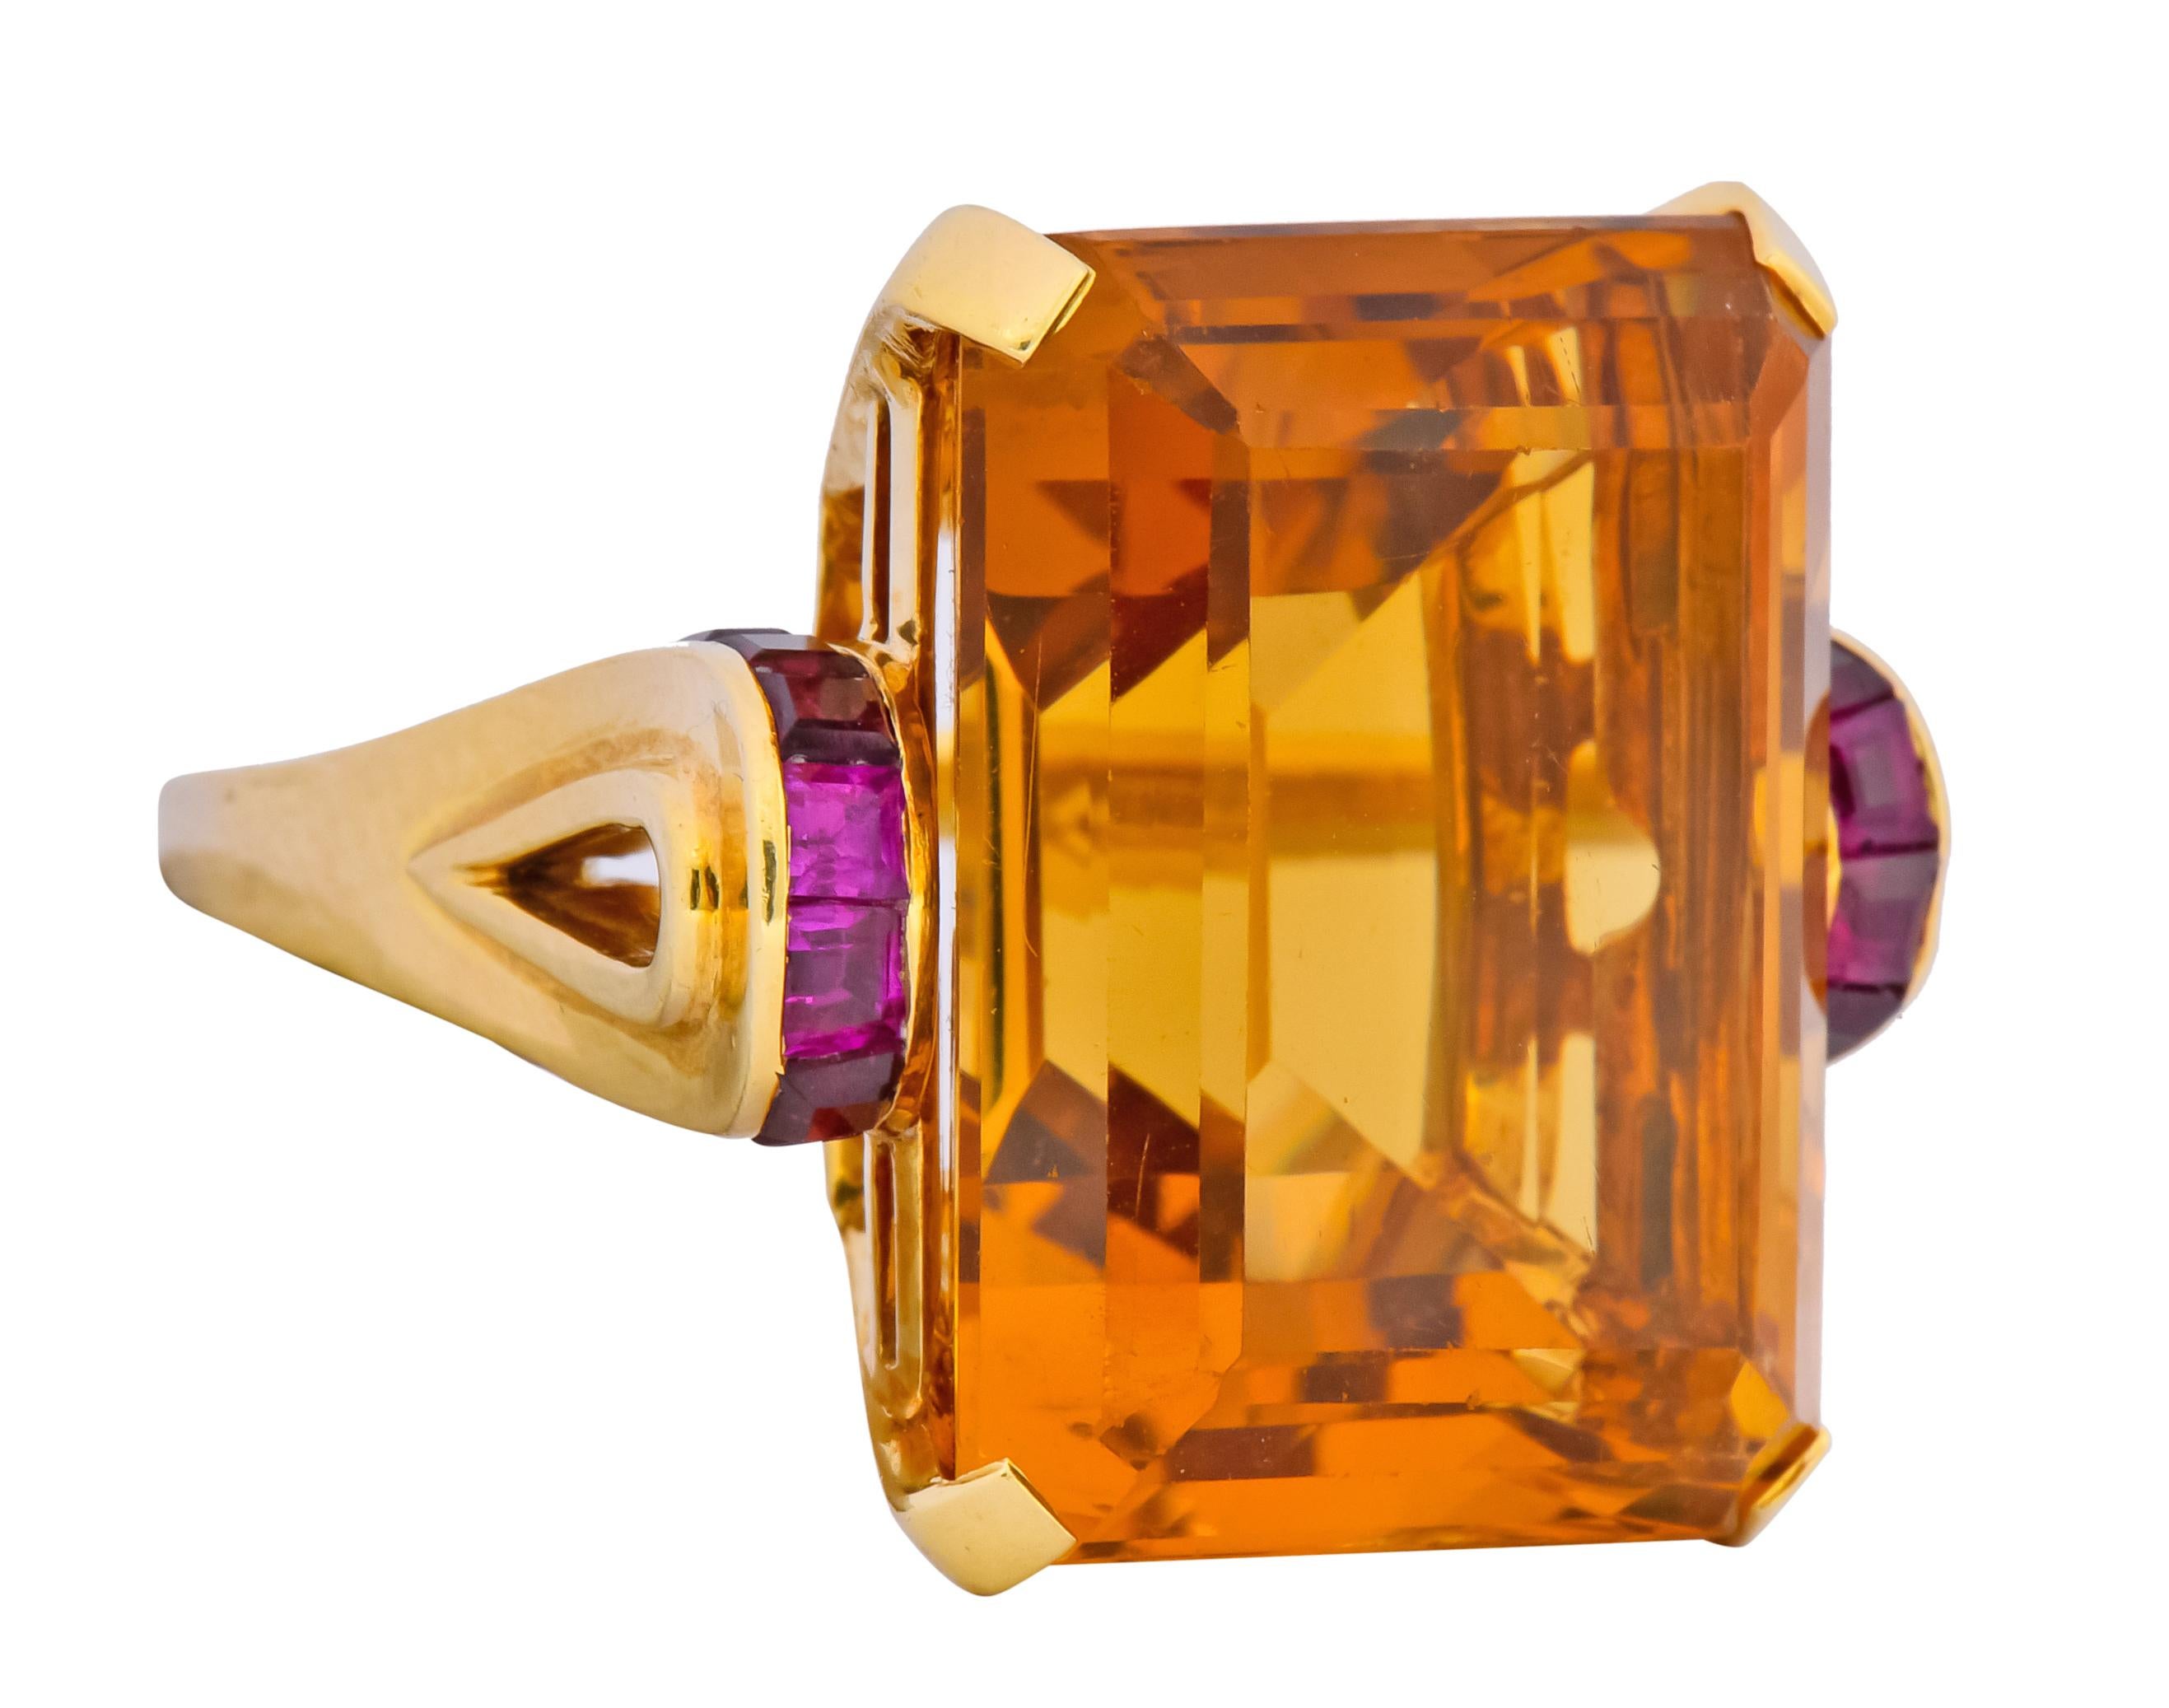 Centering a basket set rectangular step cut citrine weighing approximately 23.90 carats, transparent and a medium-dark orangey-yellow 

Flanked by channel set calibré cut rubies weighing approximately 0.64 carat total, very well matched and a